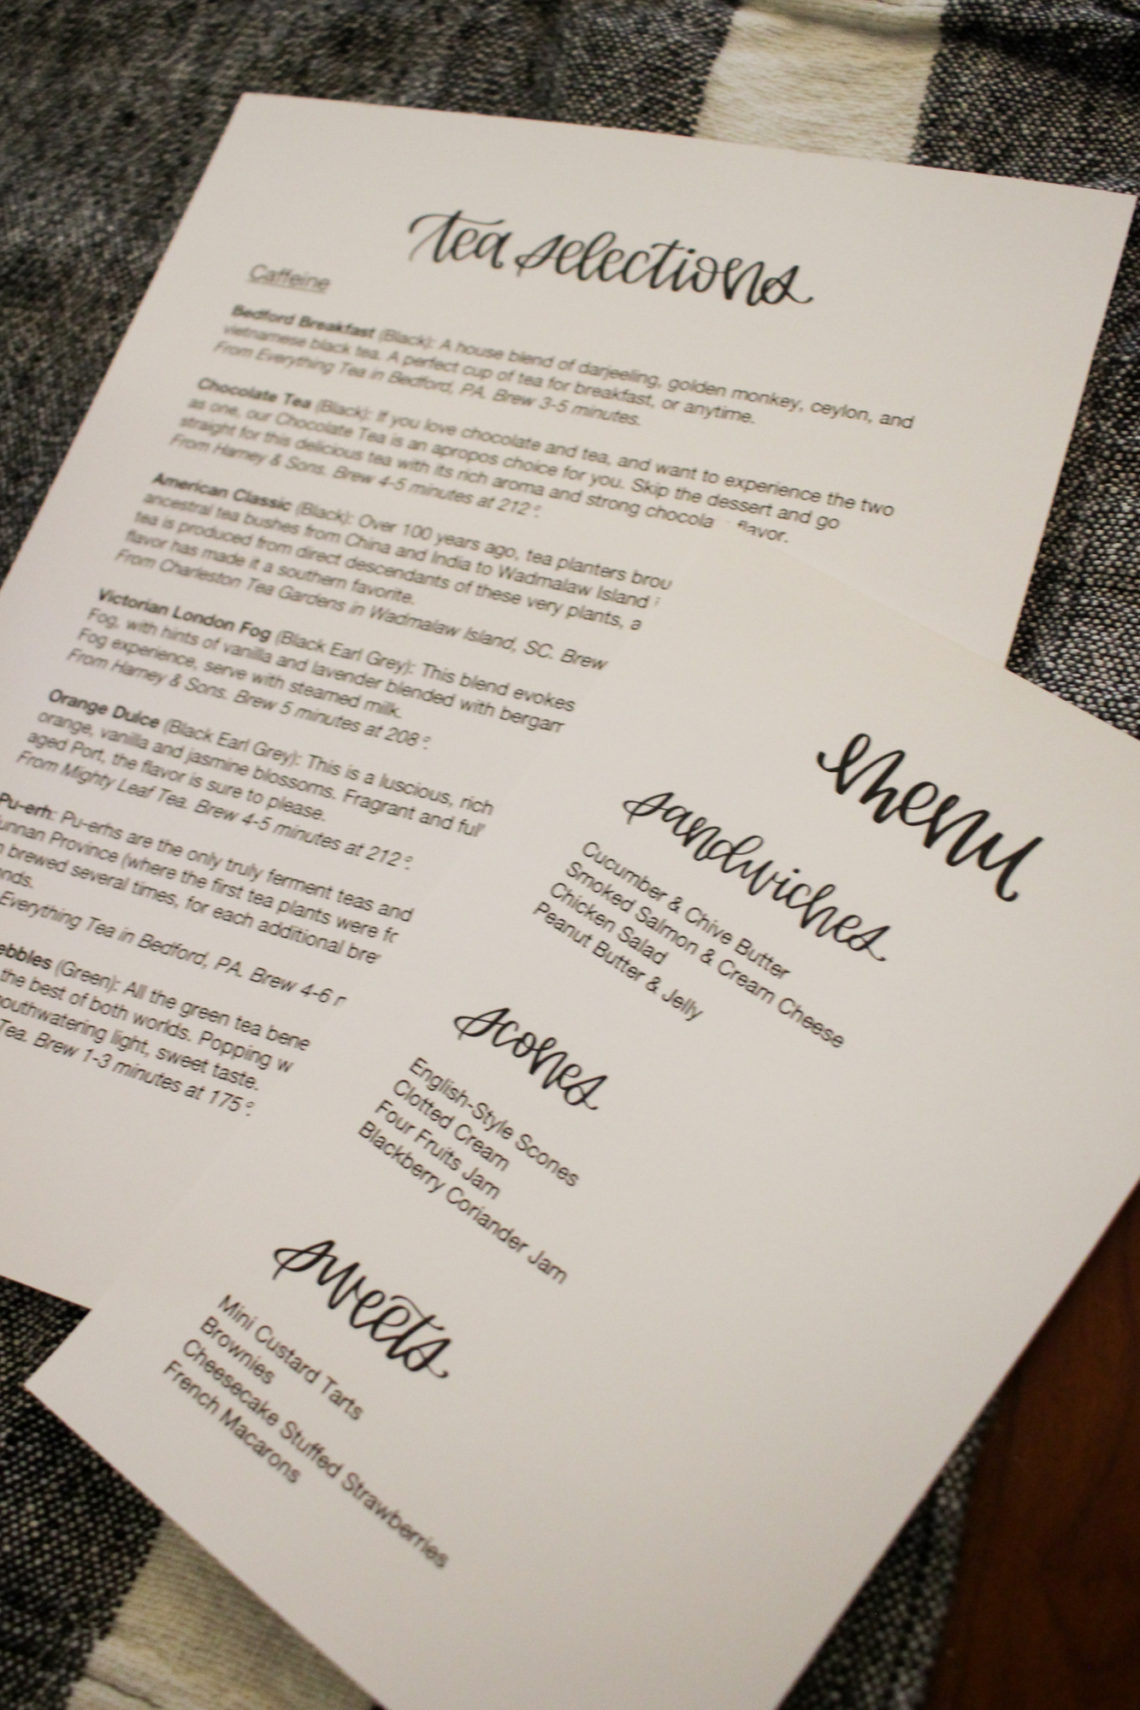 Afternoon tea menu: Image of a tea selections list and menu, featuring hand-lettered headings.